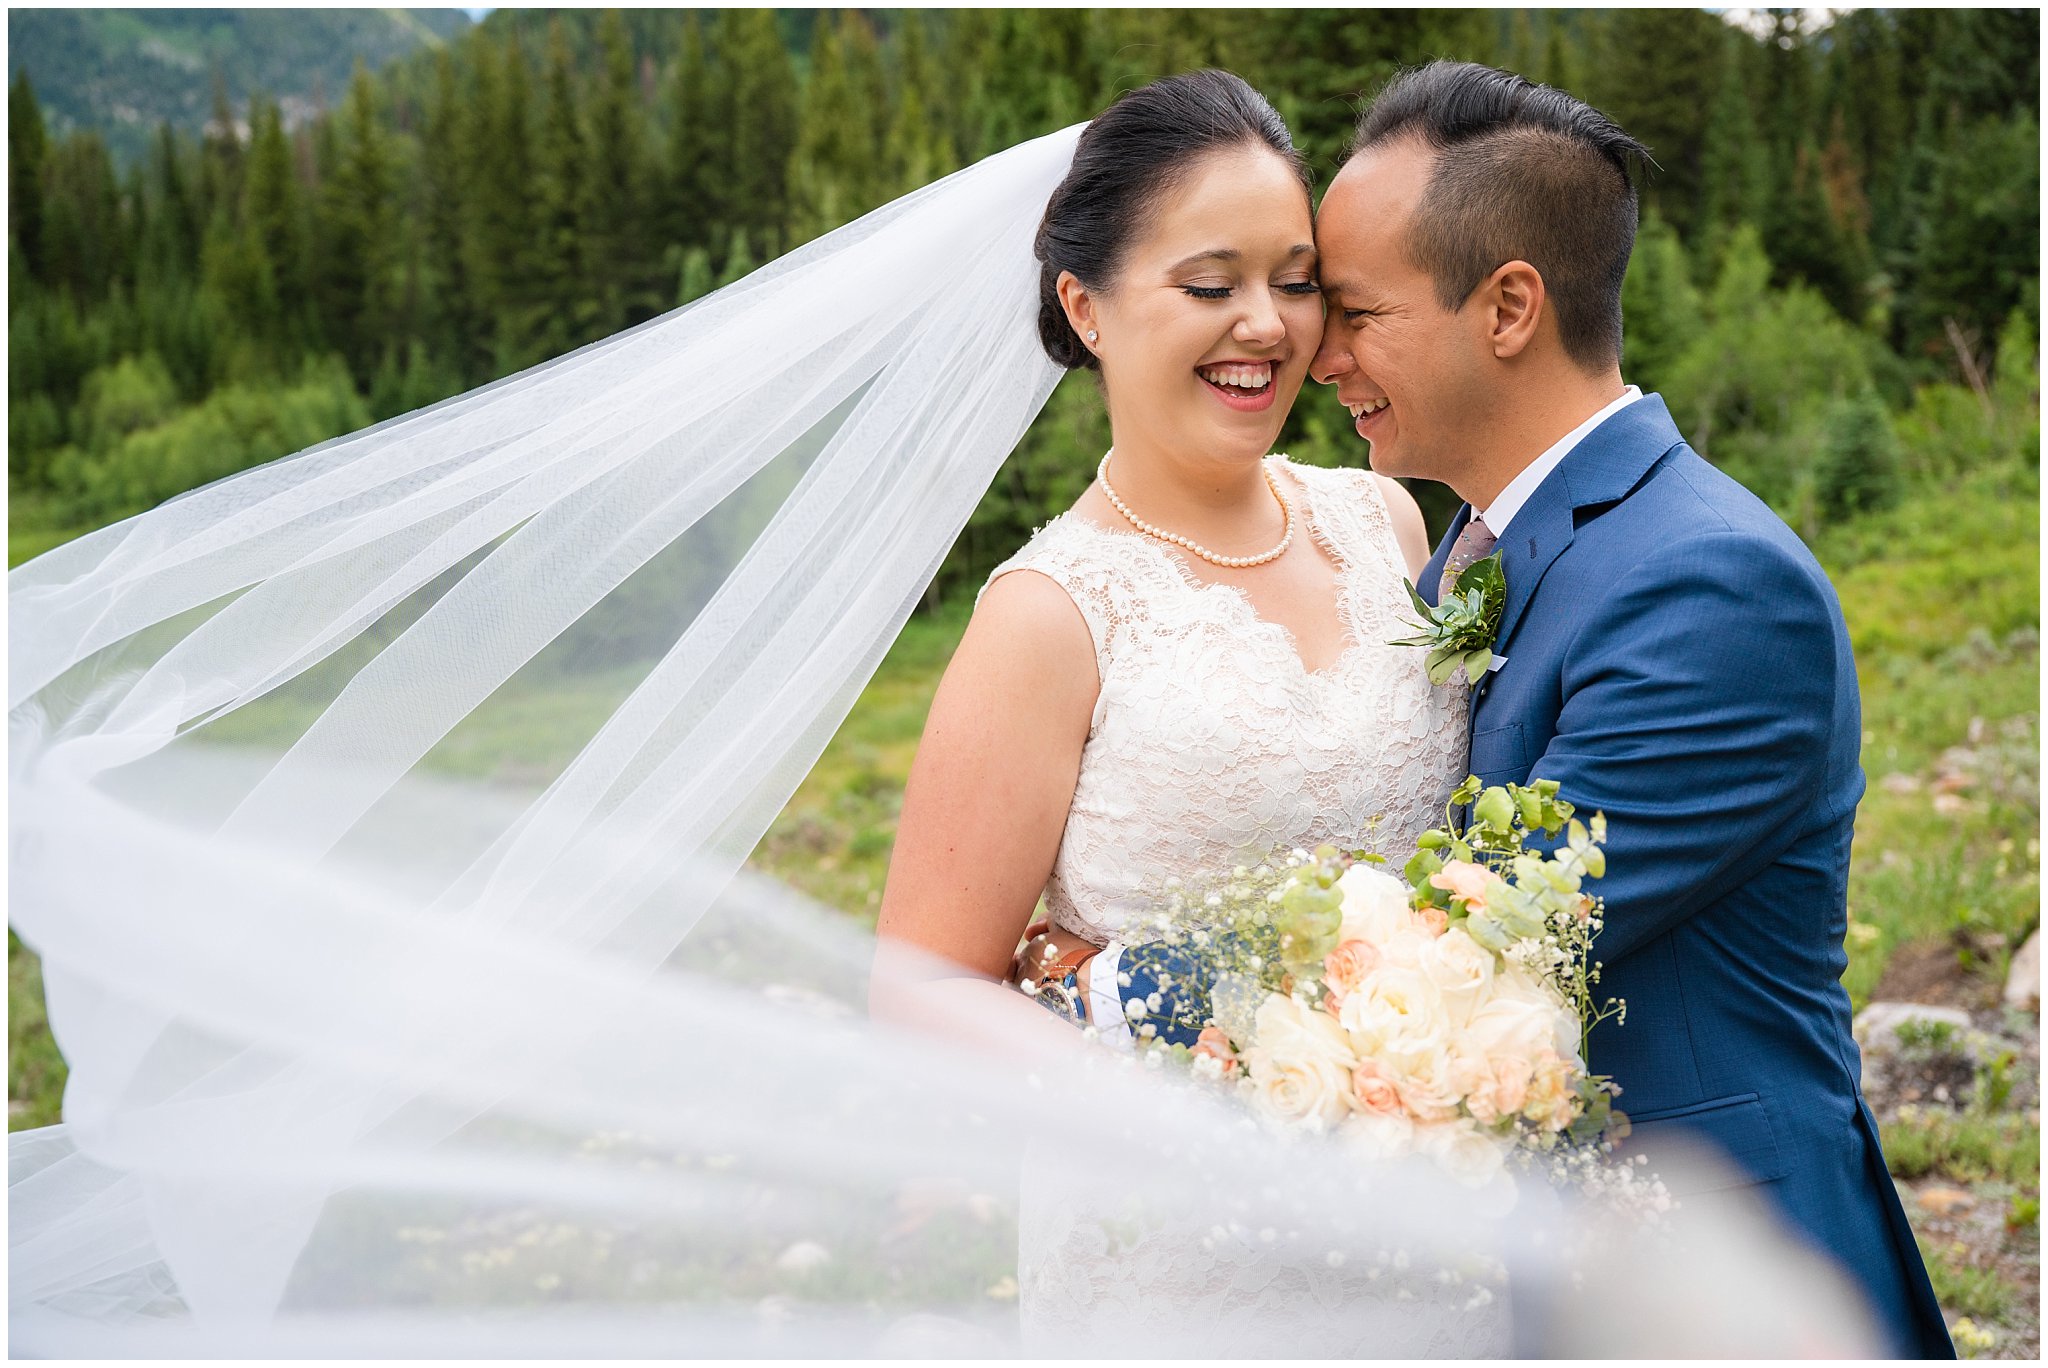 Bride and Groom portraits in the Utah Mountains at Jordan Pines | Cactus and Tropicals and Salt Lake Church Wedding | Jessie and Dallin Photography